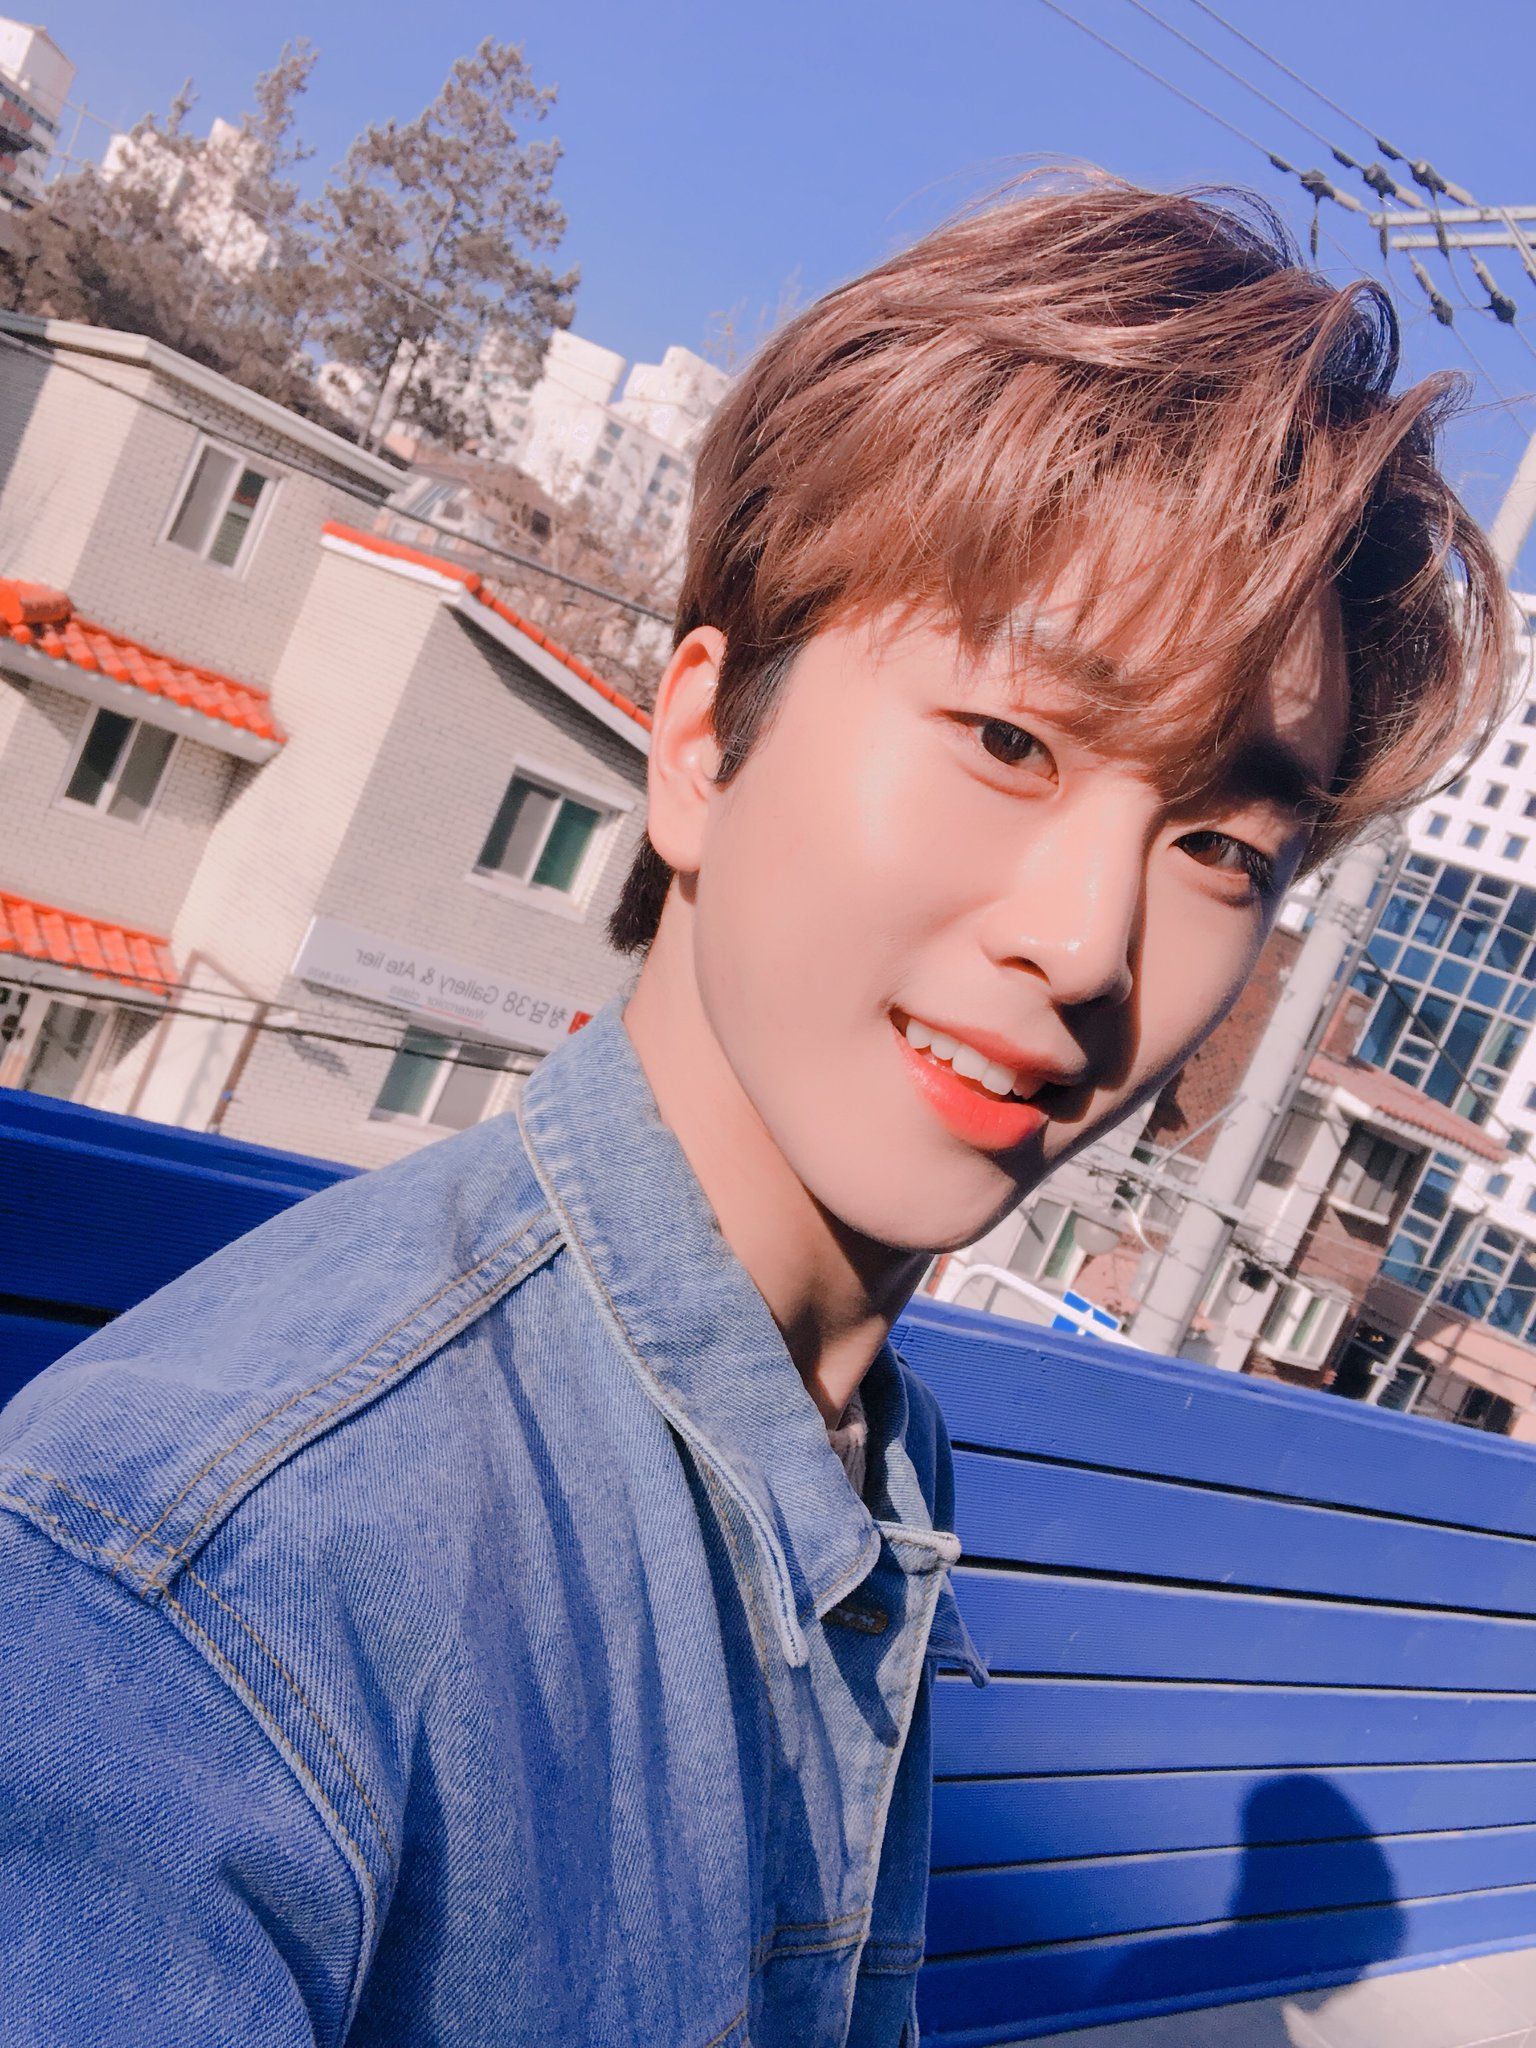 newkidd-jin-kwon-confirms-to-star-in-new-bl-web-drama-to-my-star